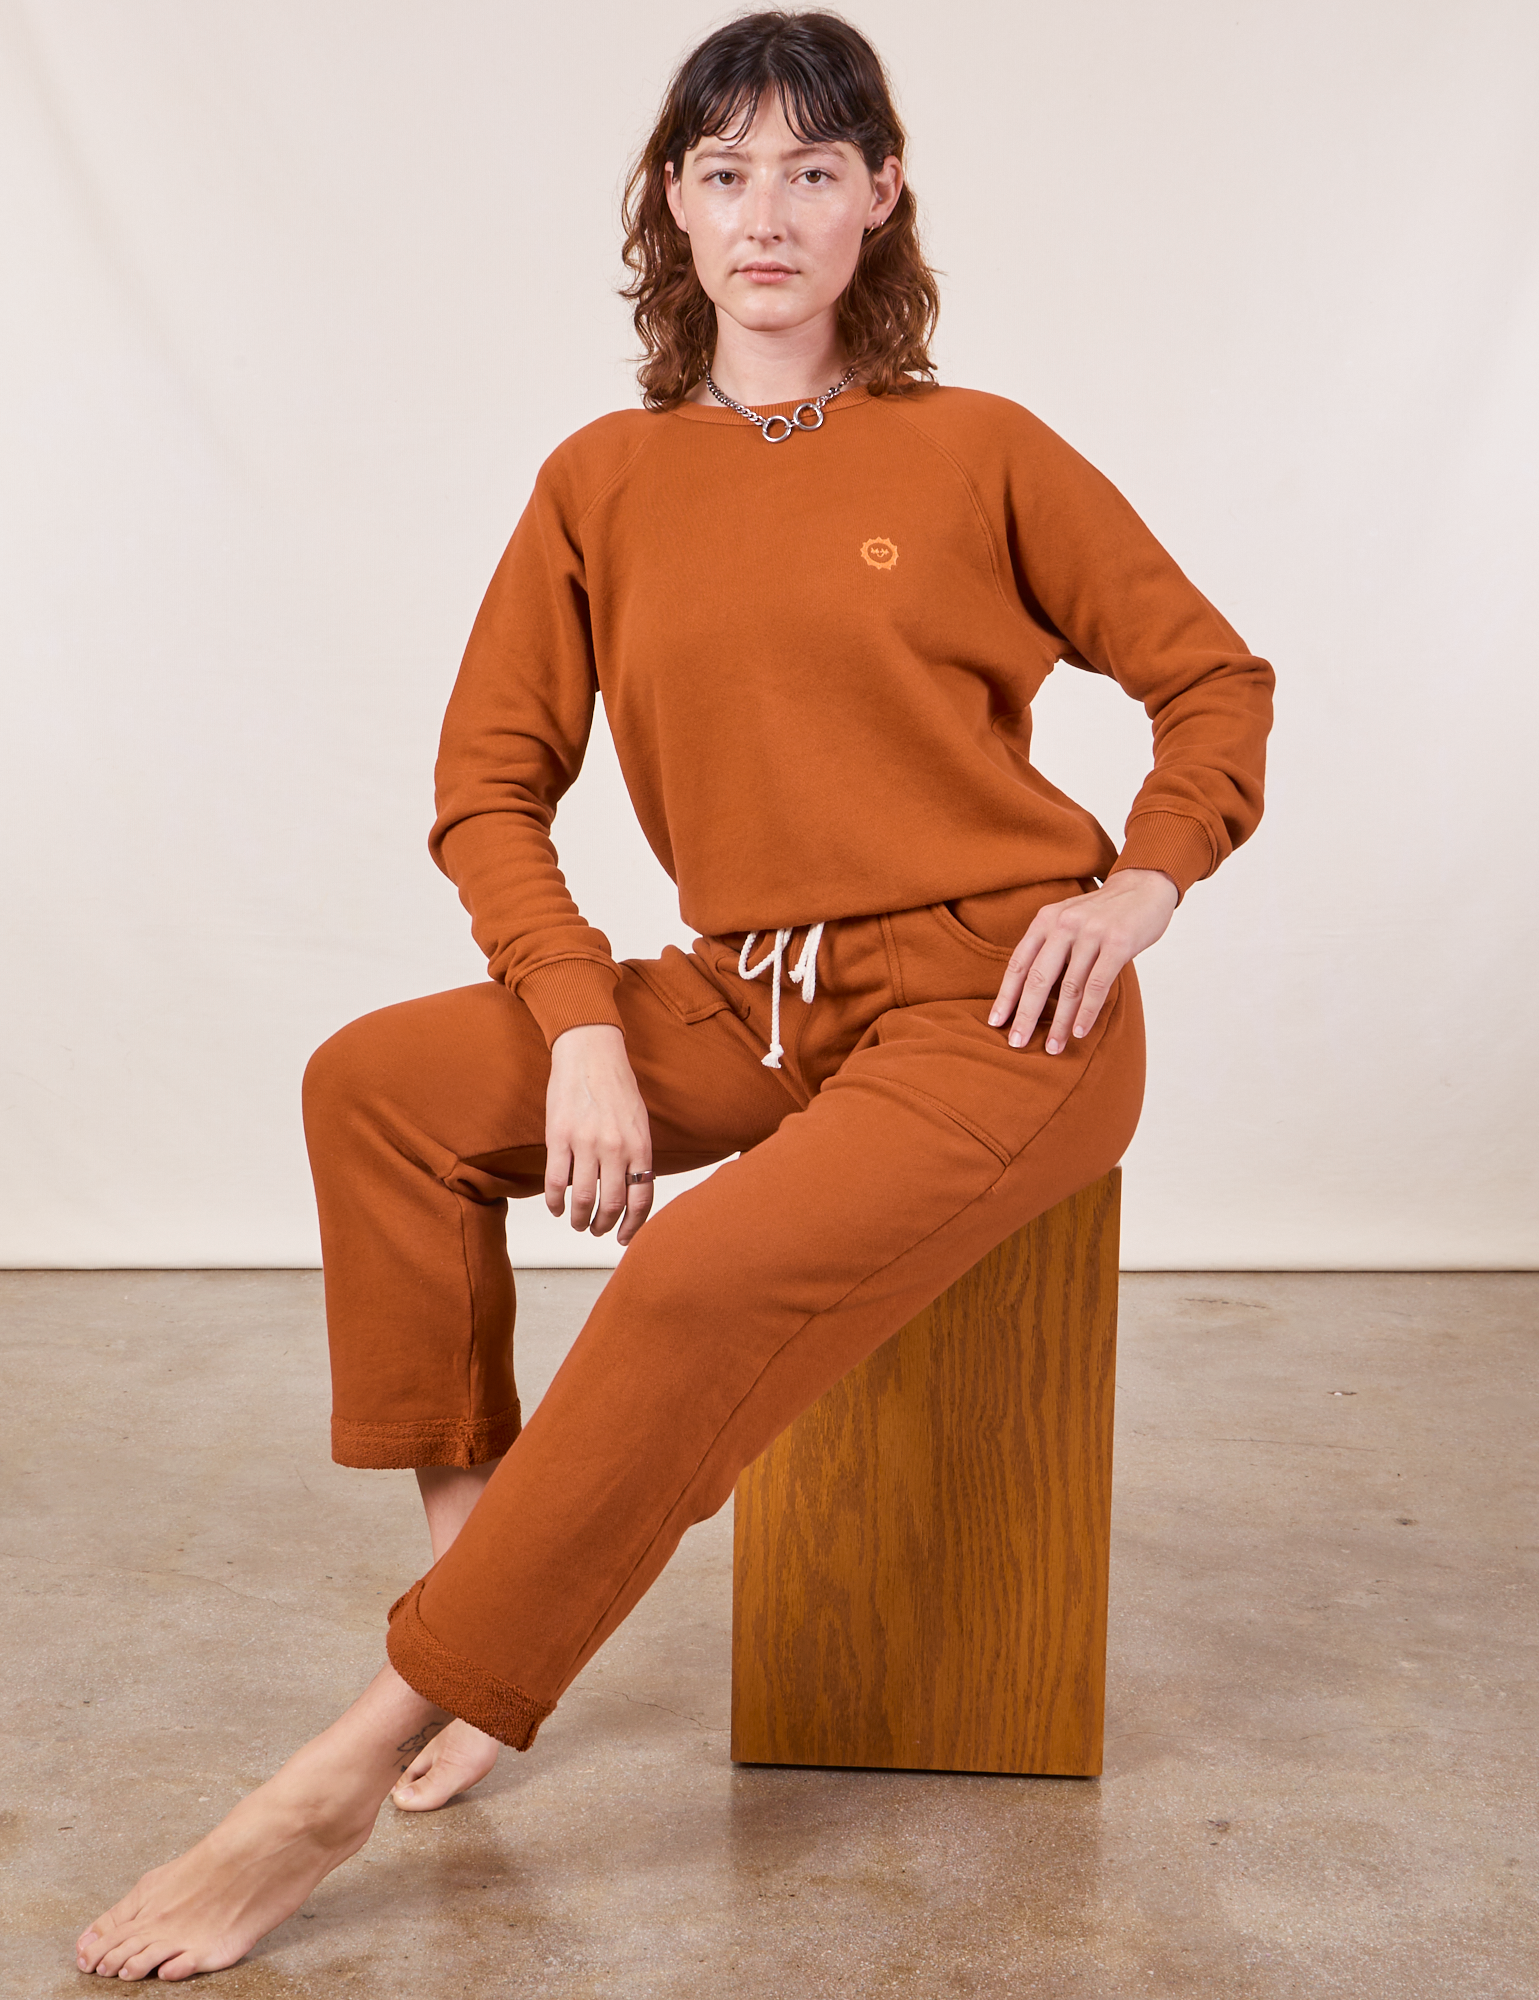 Alex is Cropped Rolled Cuff Sweatpants in Burnt Terracotta and matching Heavyweight Crew Sweatshirt